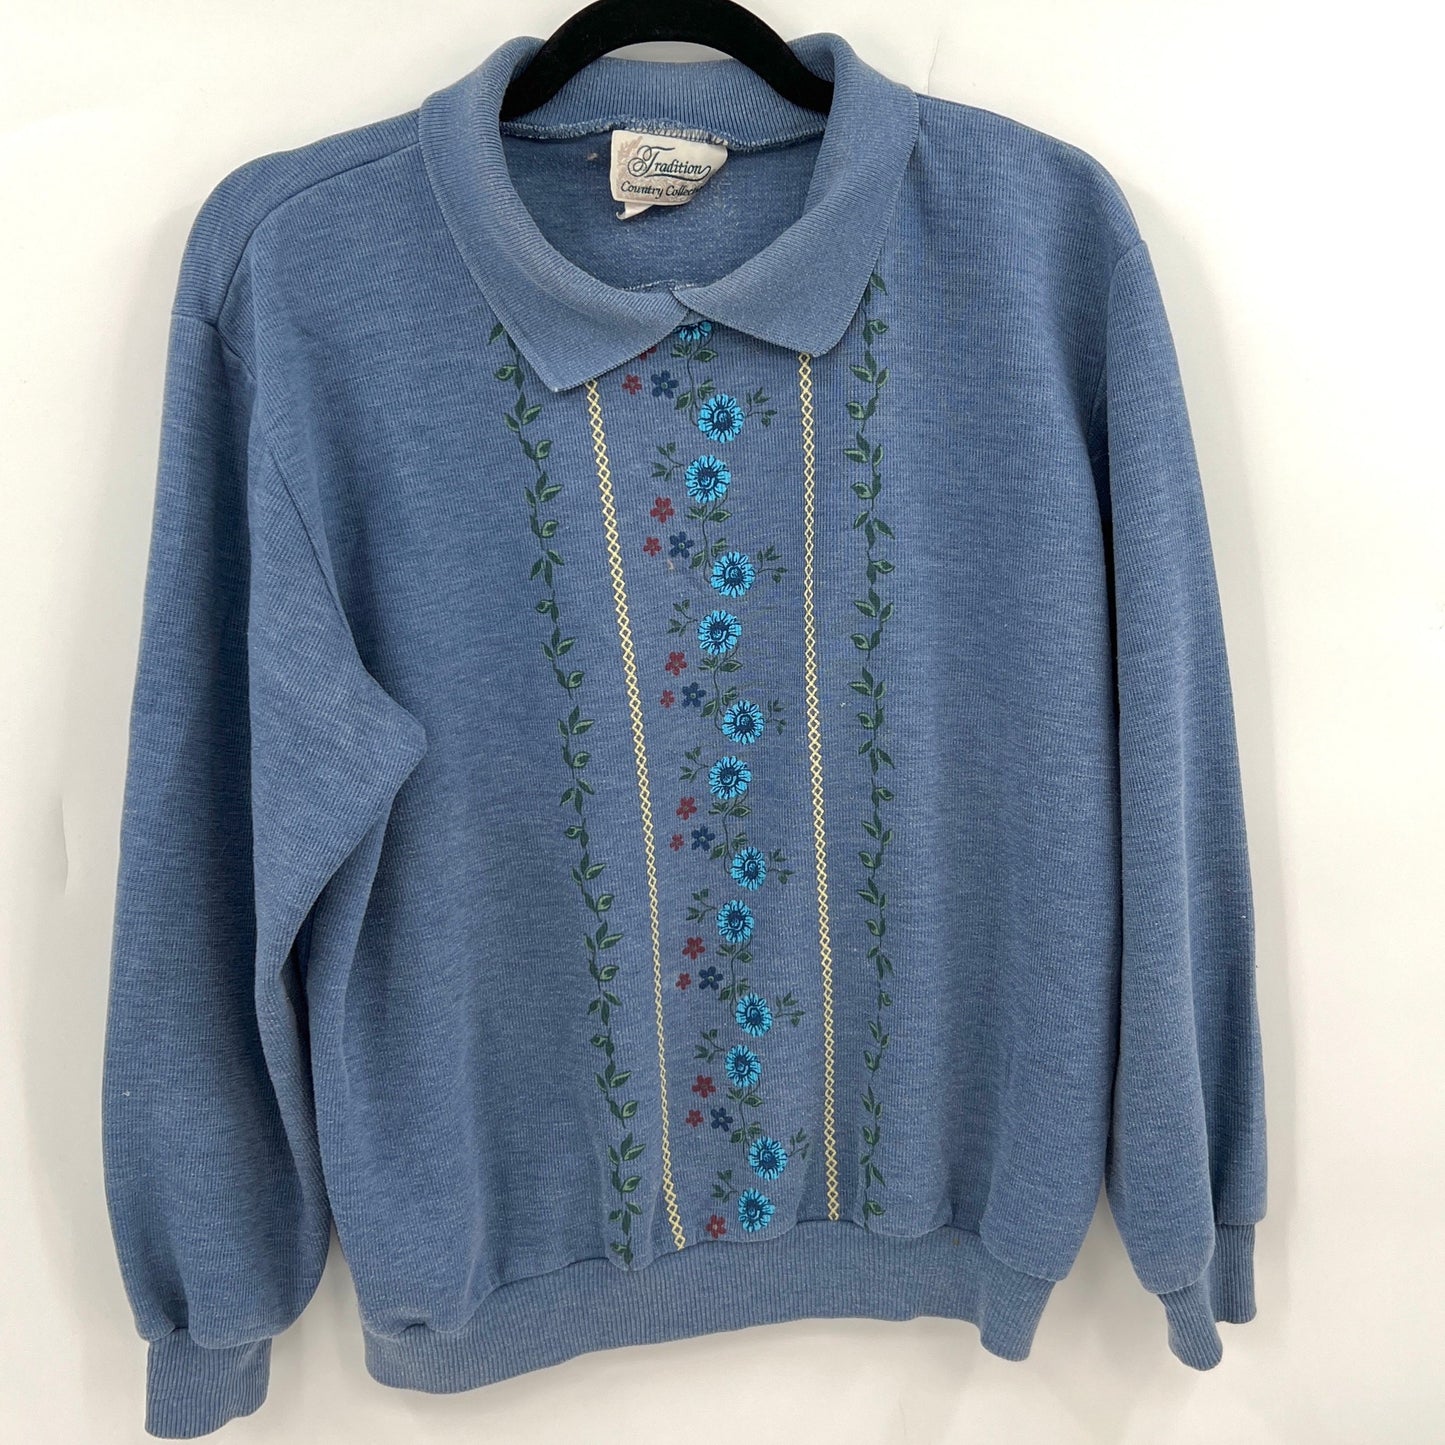 SOLD. Vintage Traditions Floral Embroidered Pullover